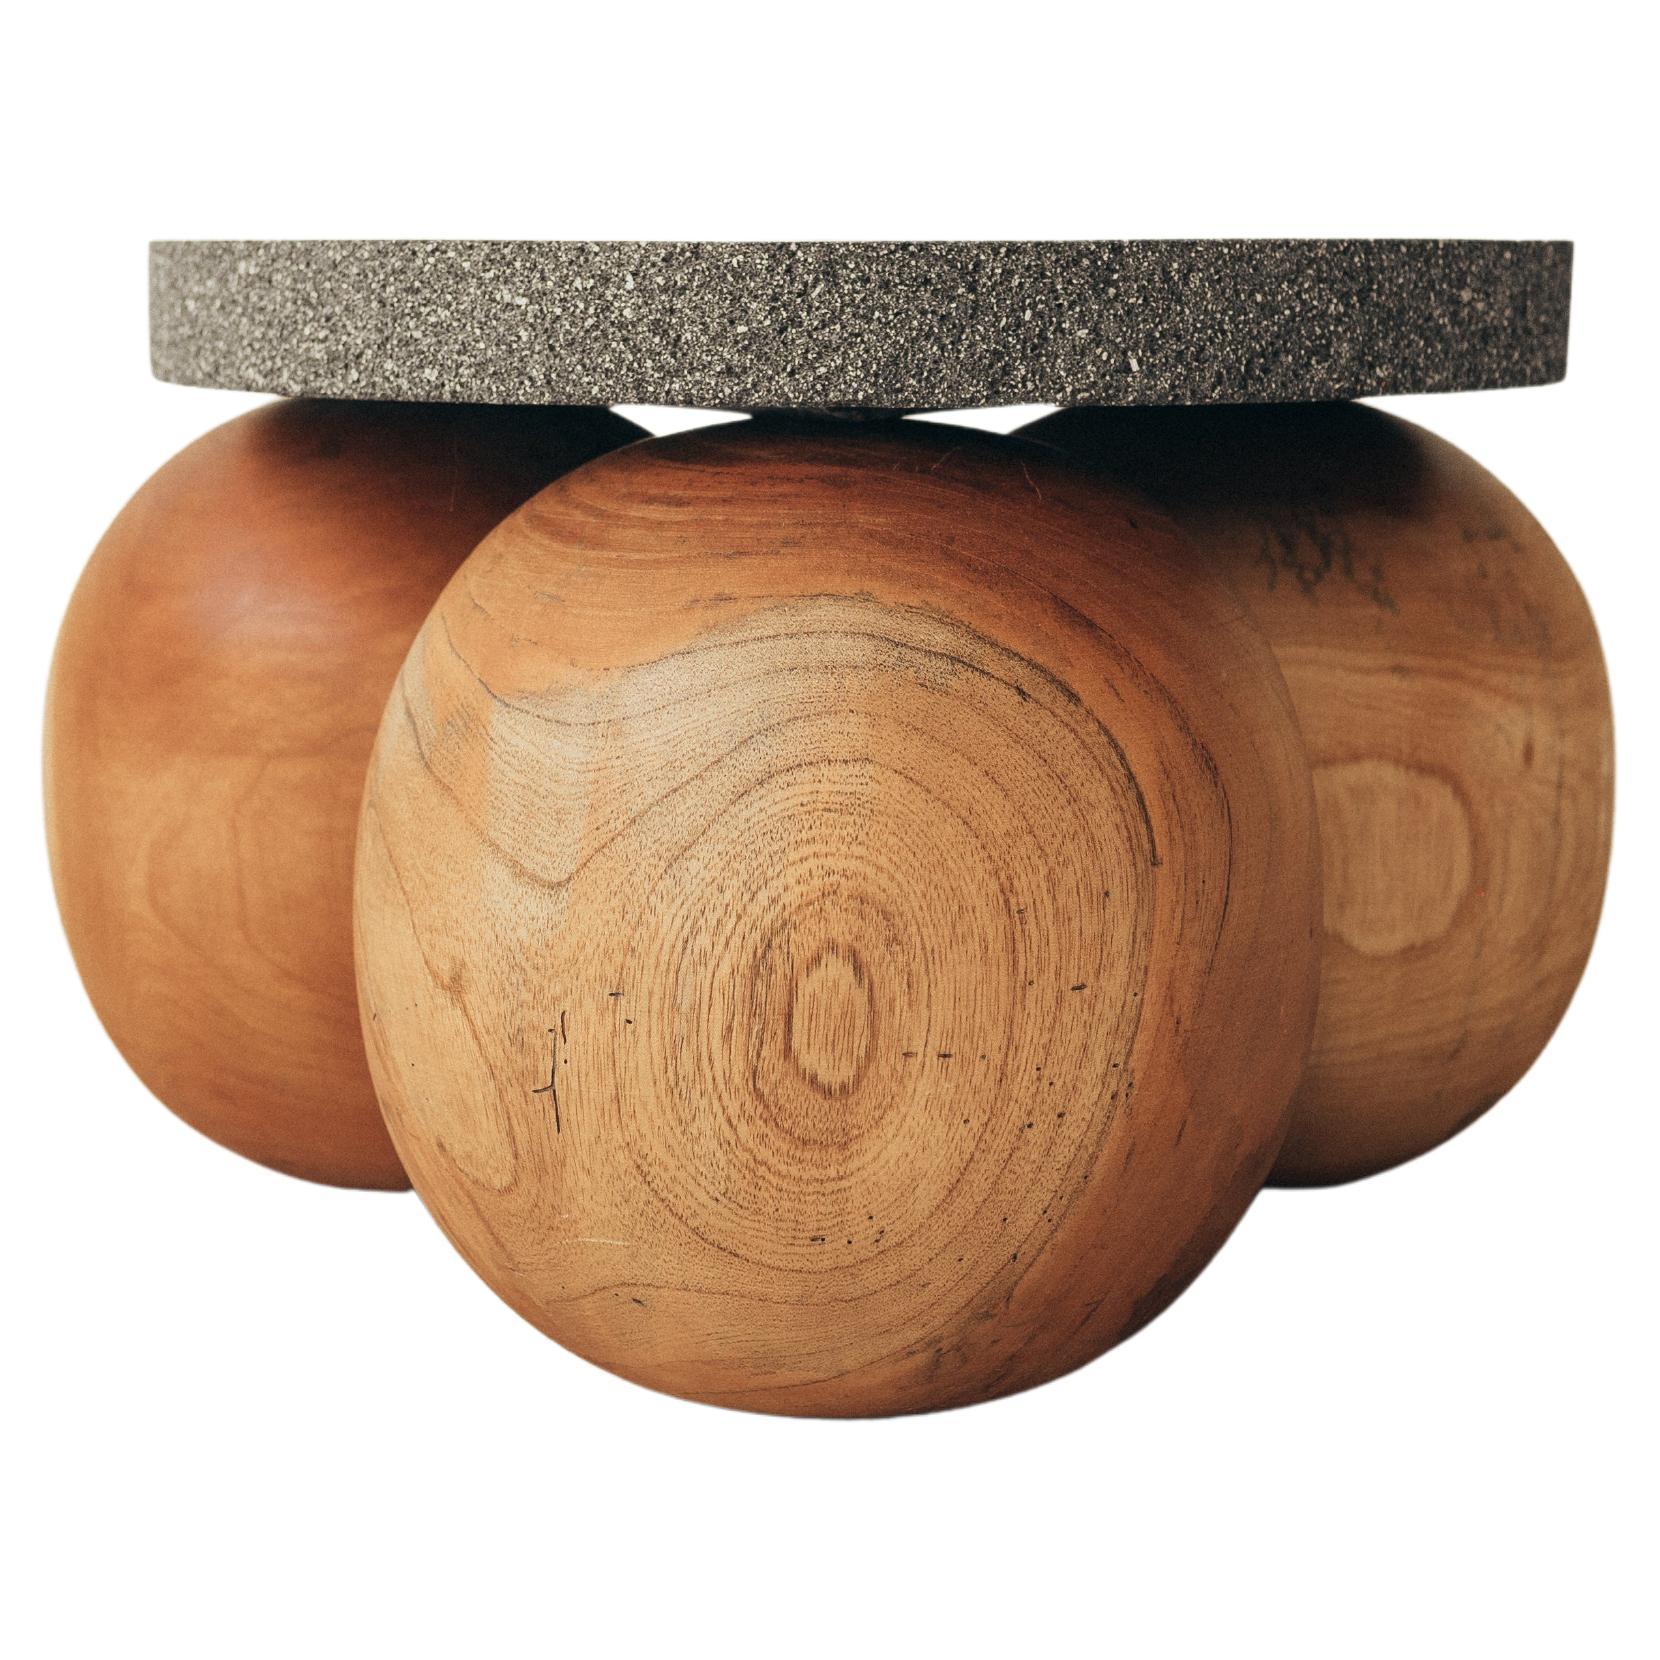 Natural Wooden Balls Table with Volcanic Stone Cover by Daniel Orozco